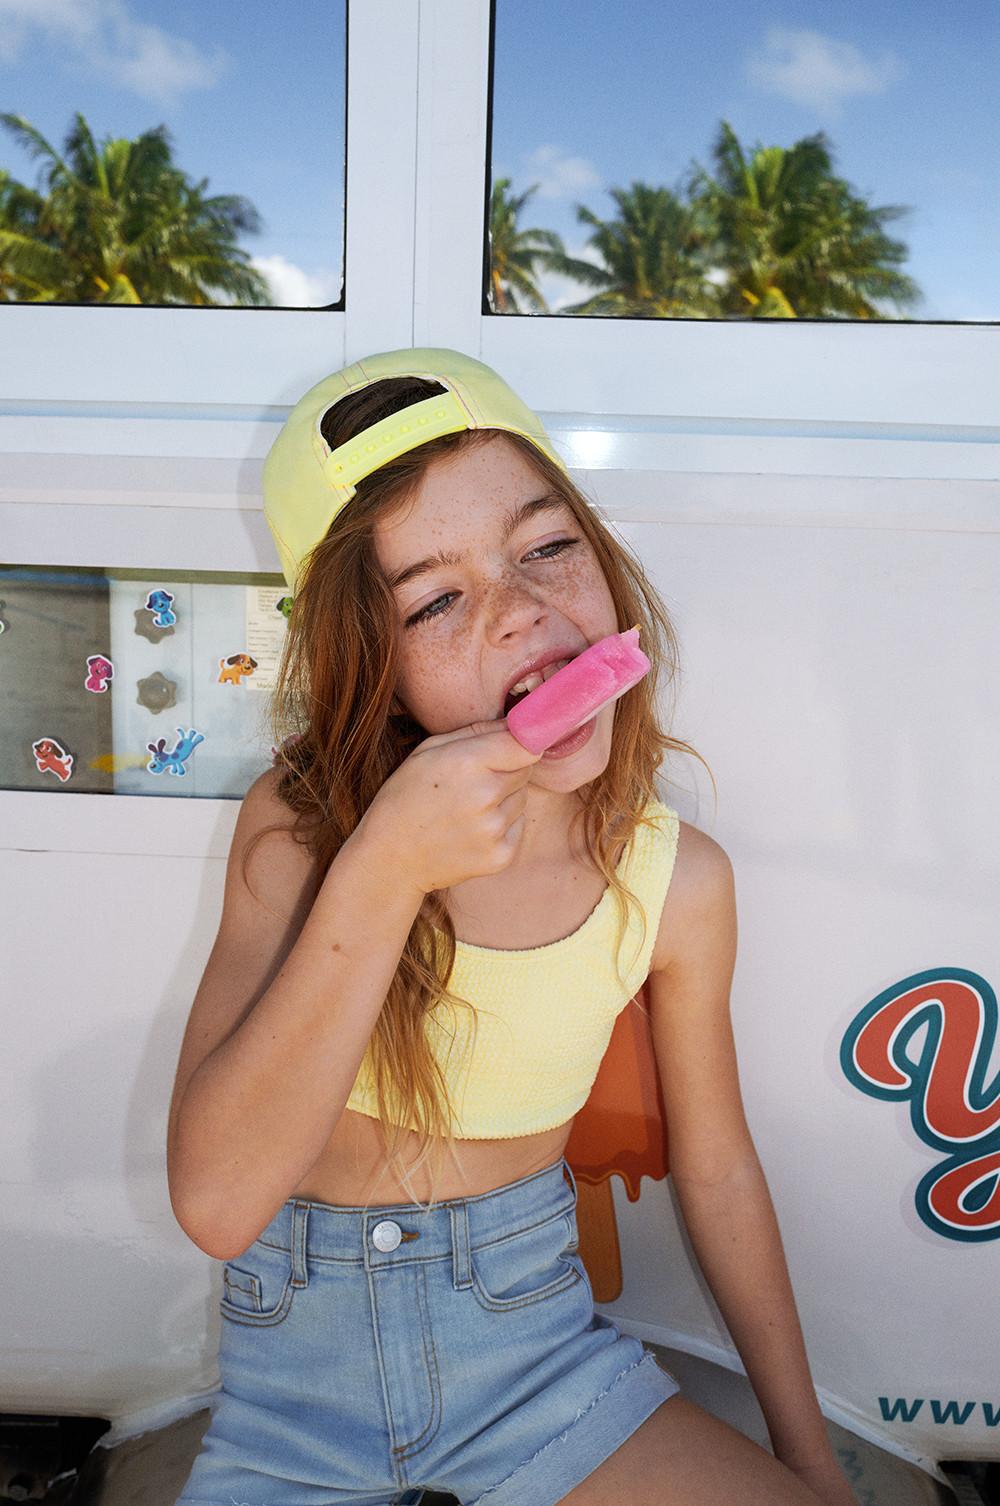 Child with ice lolly wearing denim shorts, yellow cropped swim top and yellow cap